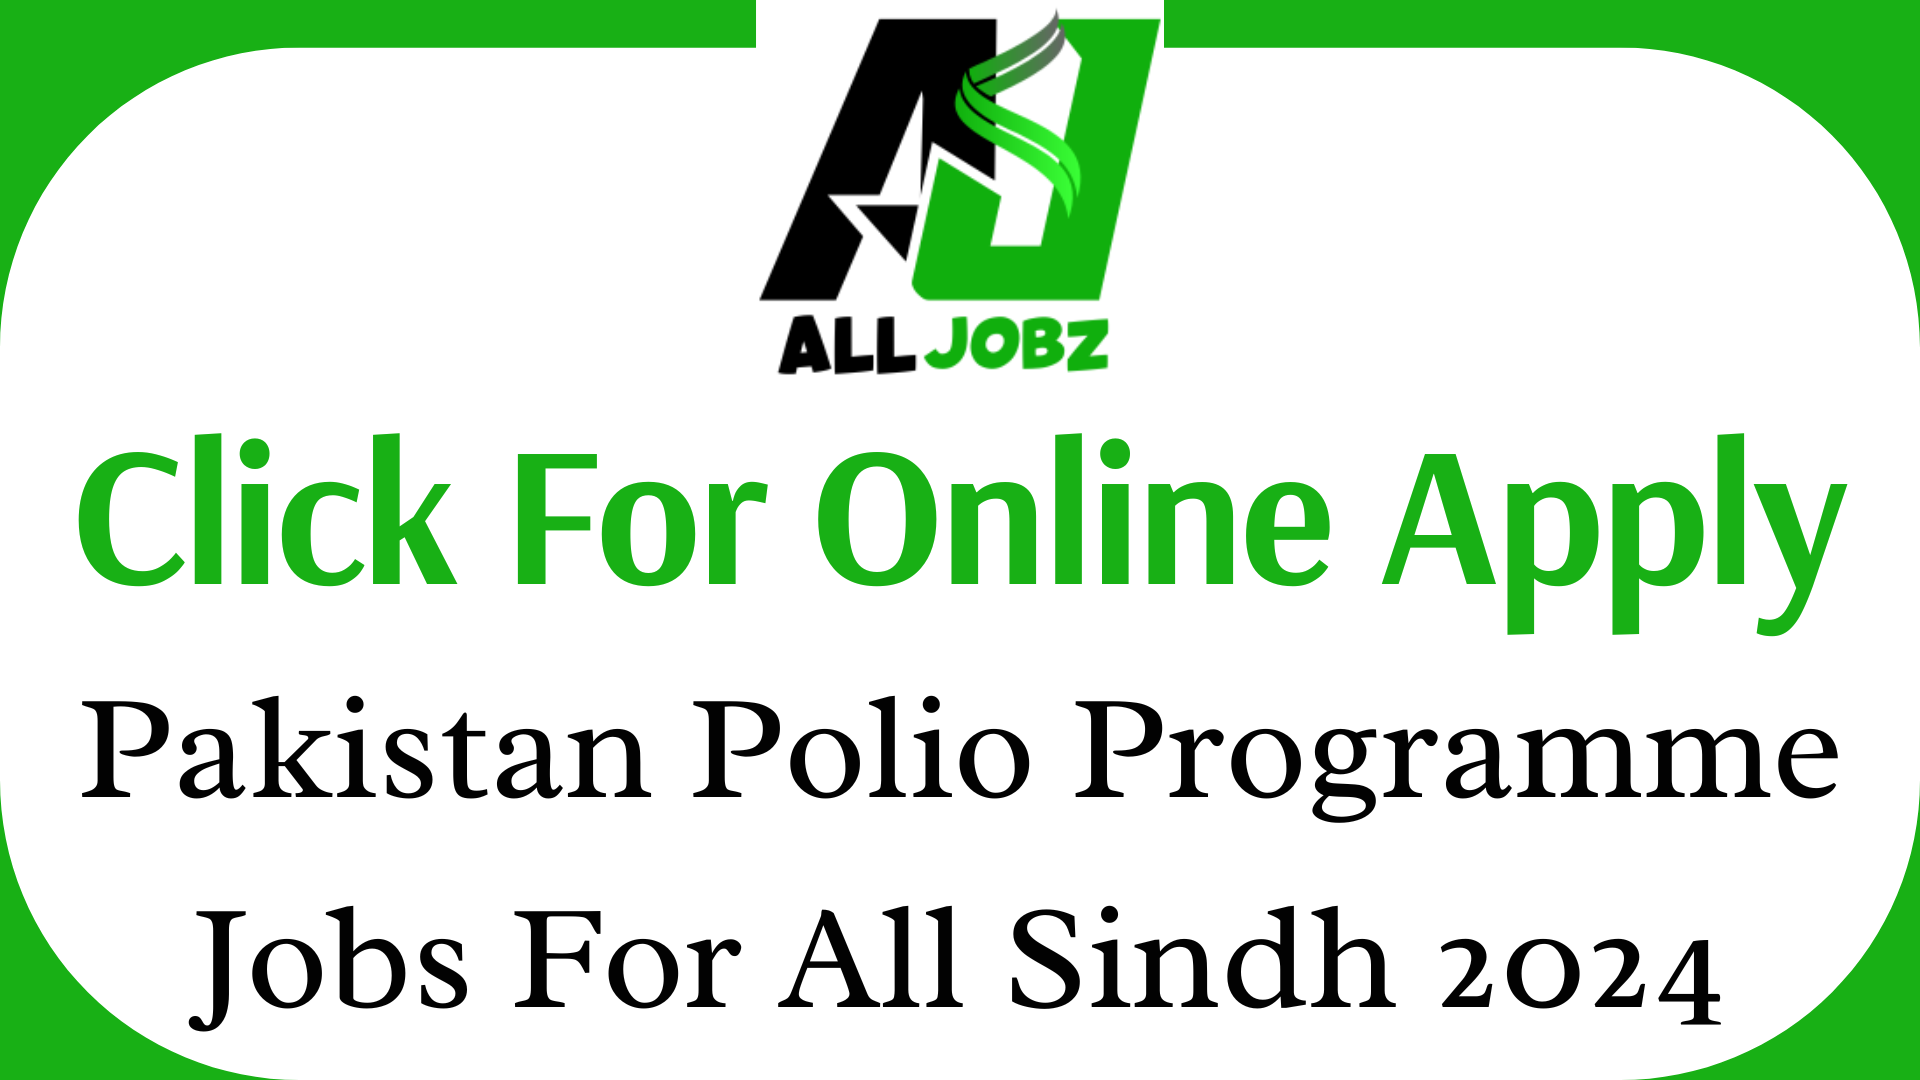 Pakistan Polio Programme Jobs For Sindh 2024, The Polio Programme Jobs For All Sindh Salary, The Polio Programme Jobs For All Sindh Online Apply, Polio Jobs Online Apply, Polio Campaign Schedule 2024 In Pakistan, Pakistan Polio Programme Jobs For All Sindh Salary, Pakistan Polio Programme Jobs For All Sindh Online Apply, Polio Official Website Pakistan, Polio Campaign Schedule 2024 In Pakistan, Polio Jobs Online Apply, Polio Payment 2024, Polio Campaign 2024, Next Polio Drops Schedule 2024, Alljobzpk Pakistan, Alljobz.pk Pakistan, Jobz.pk, Jobs.pk, Newz.com.pk, Vulearning.com, And Paperpk.com